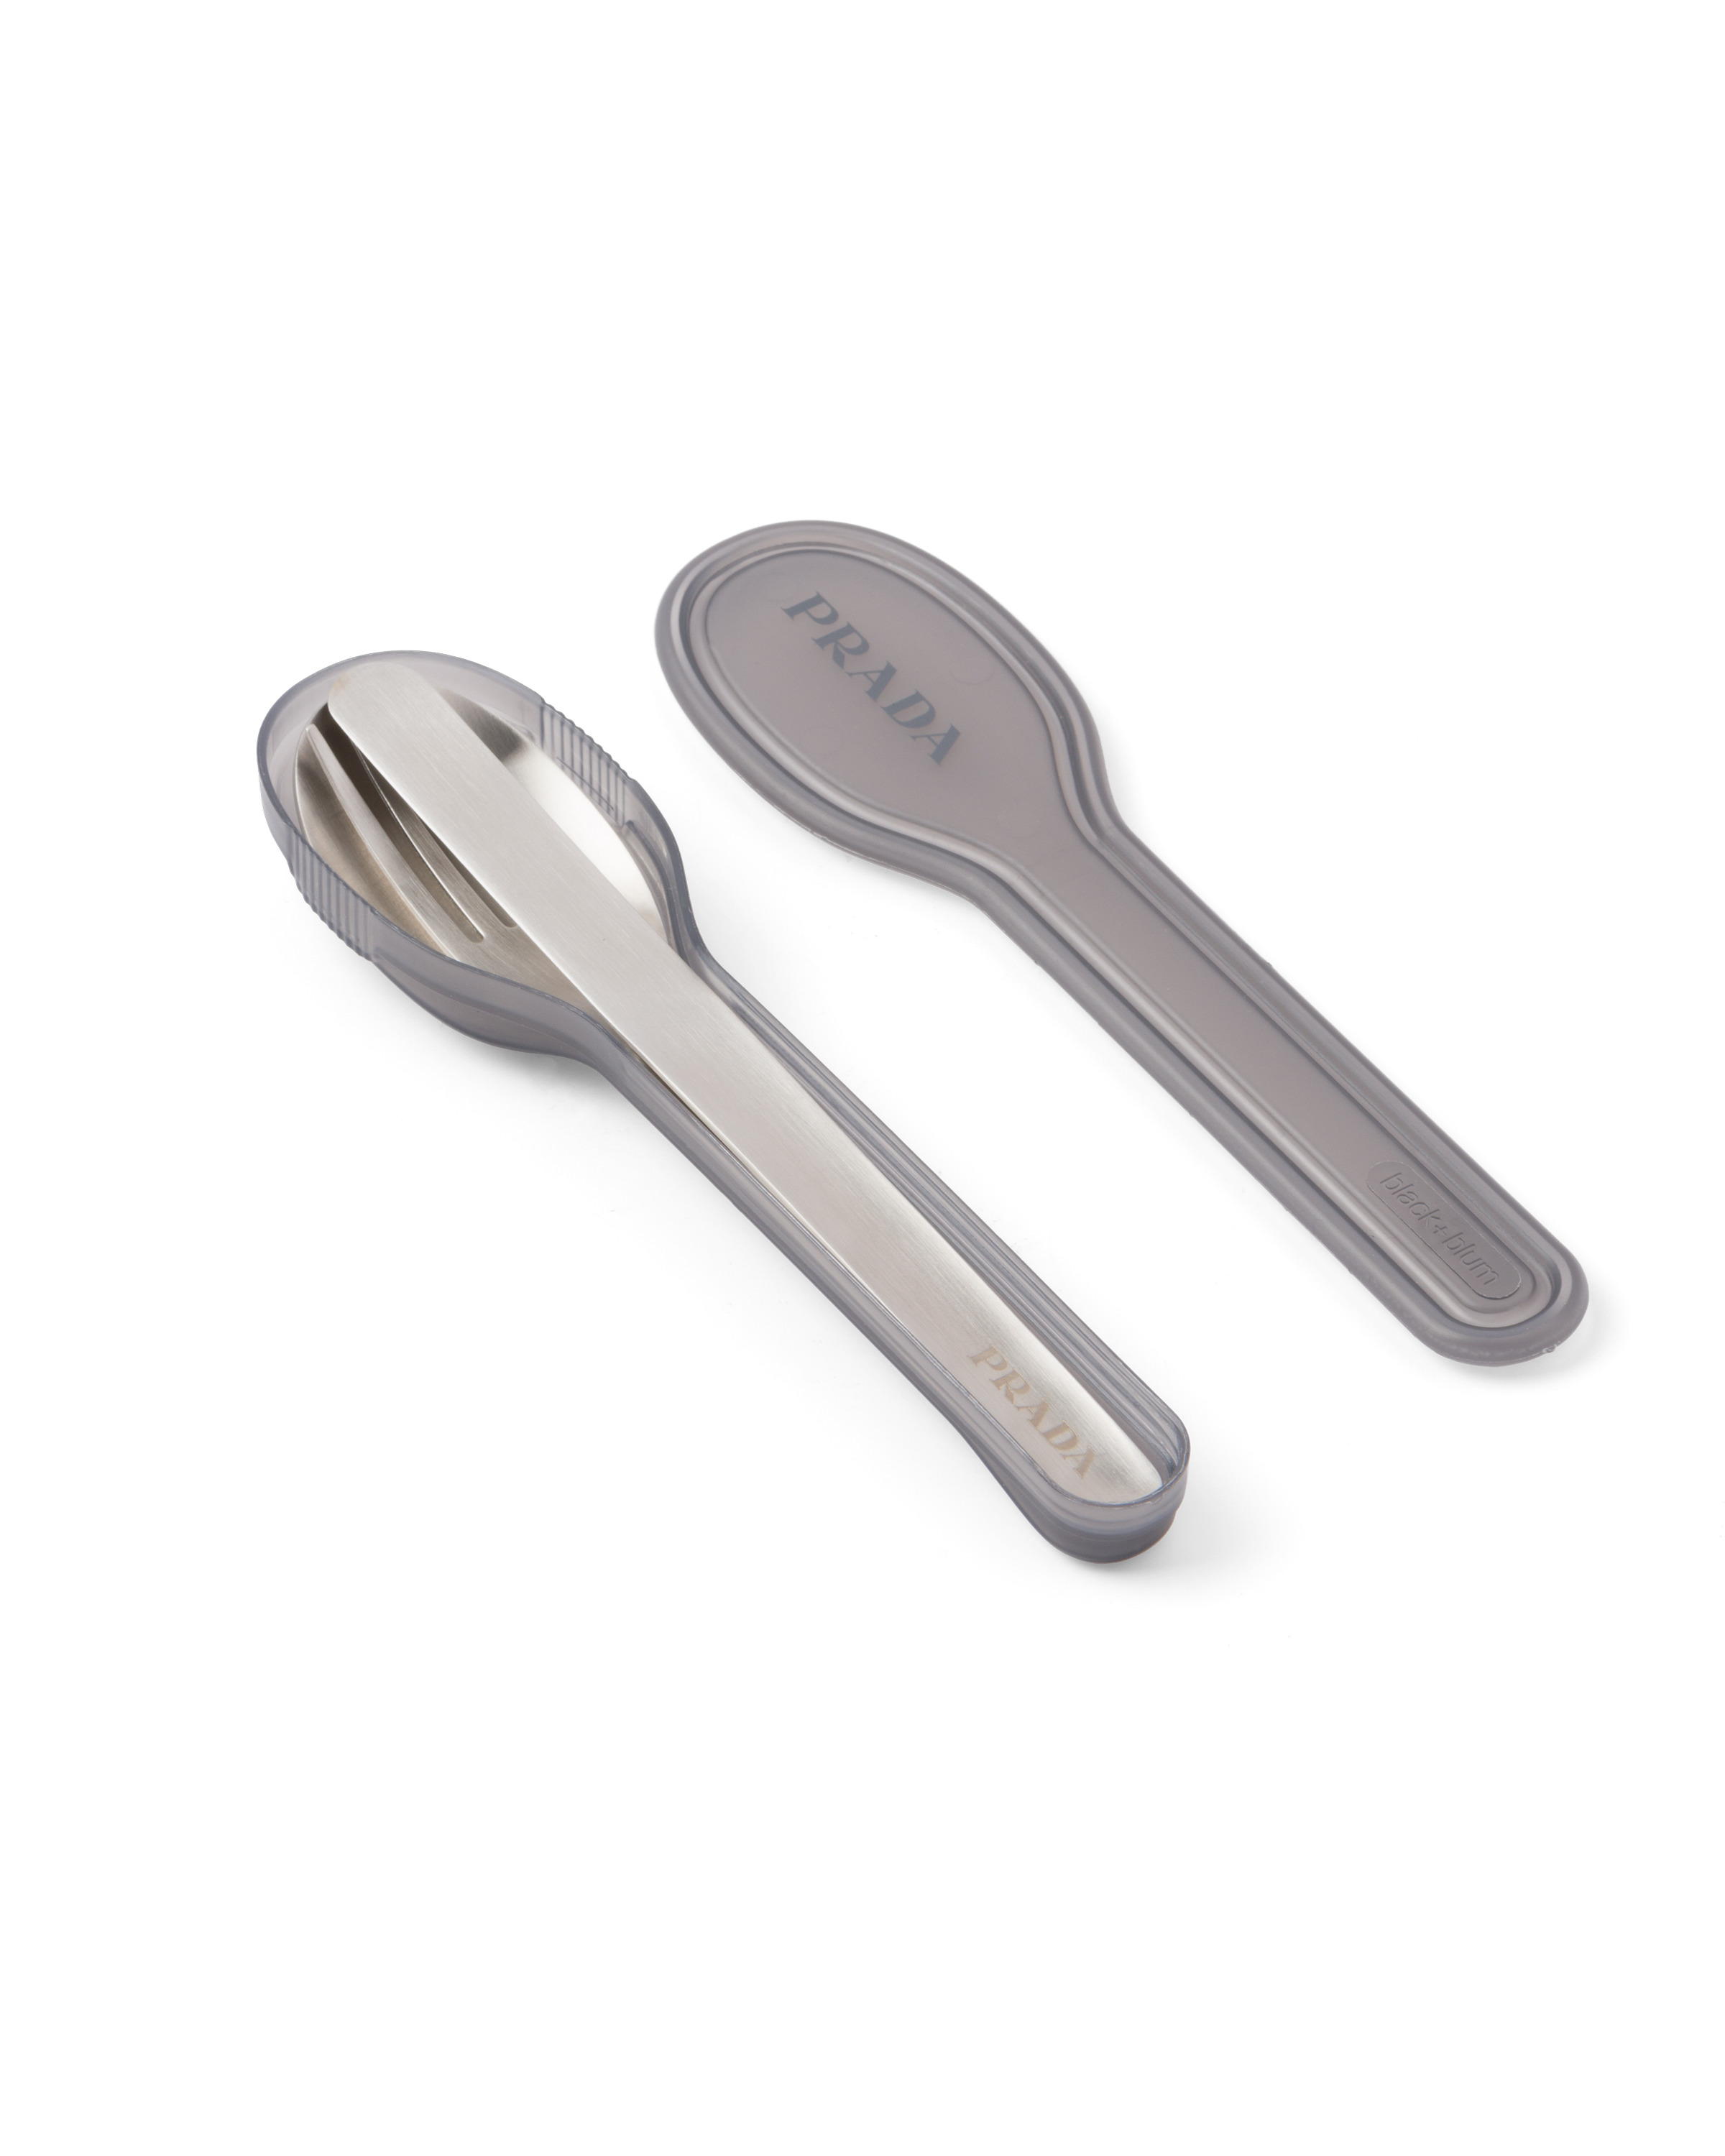 Stainless steel cutlery set - 3